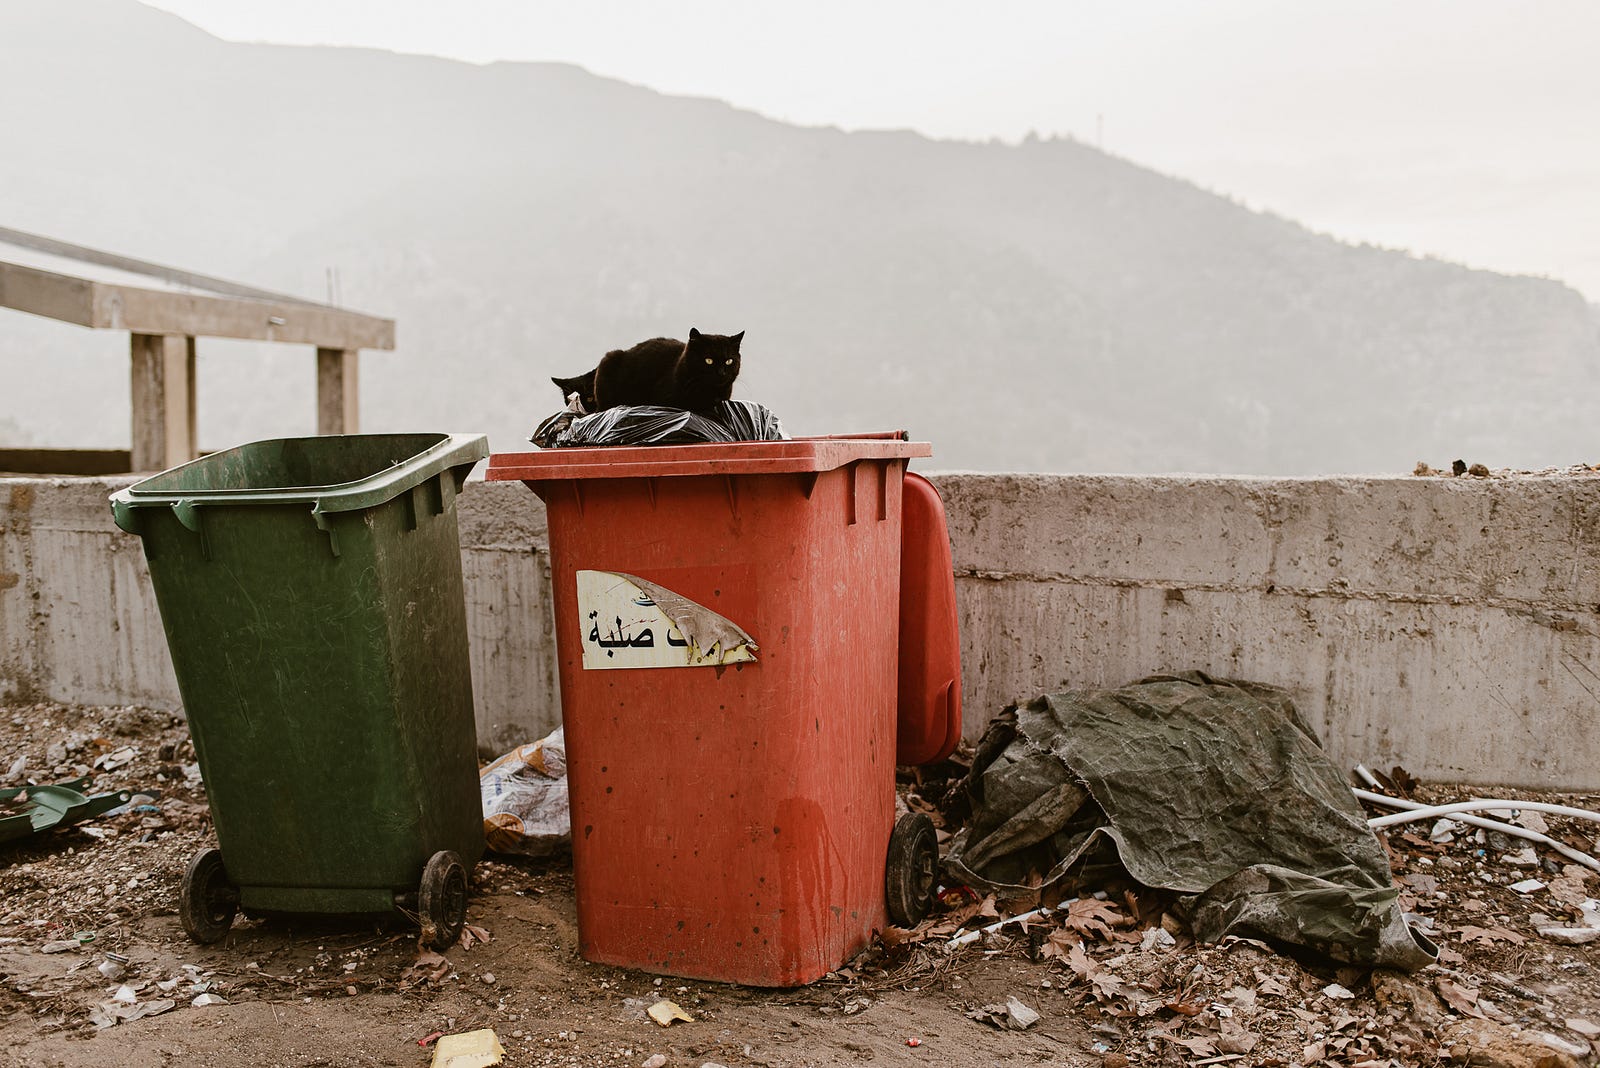 A black cat lounges on a sack of garbage in a dumpster overlooking the mountains.